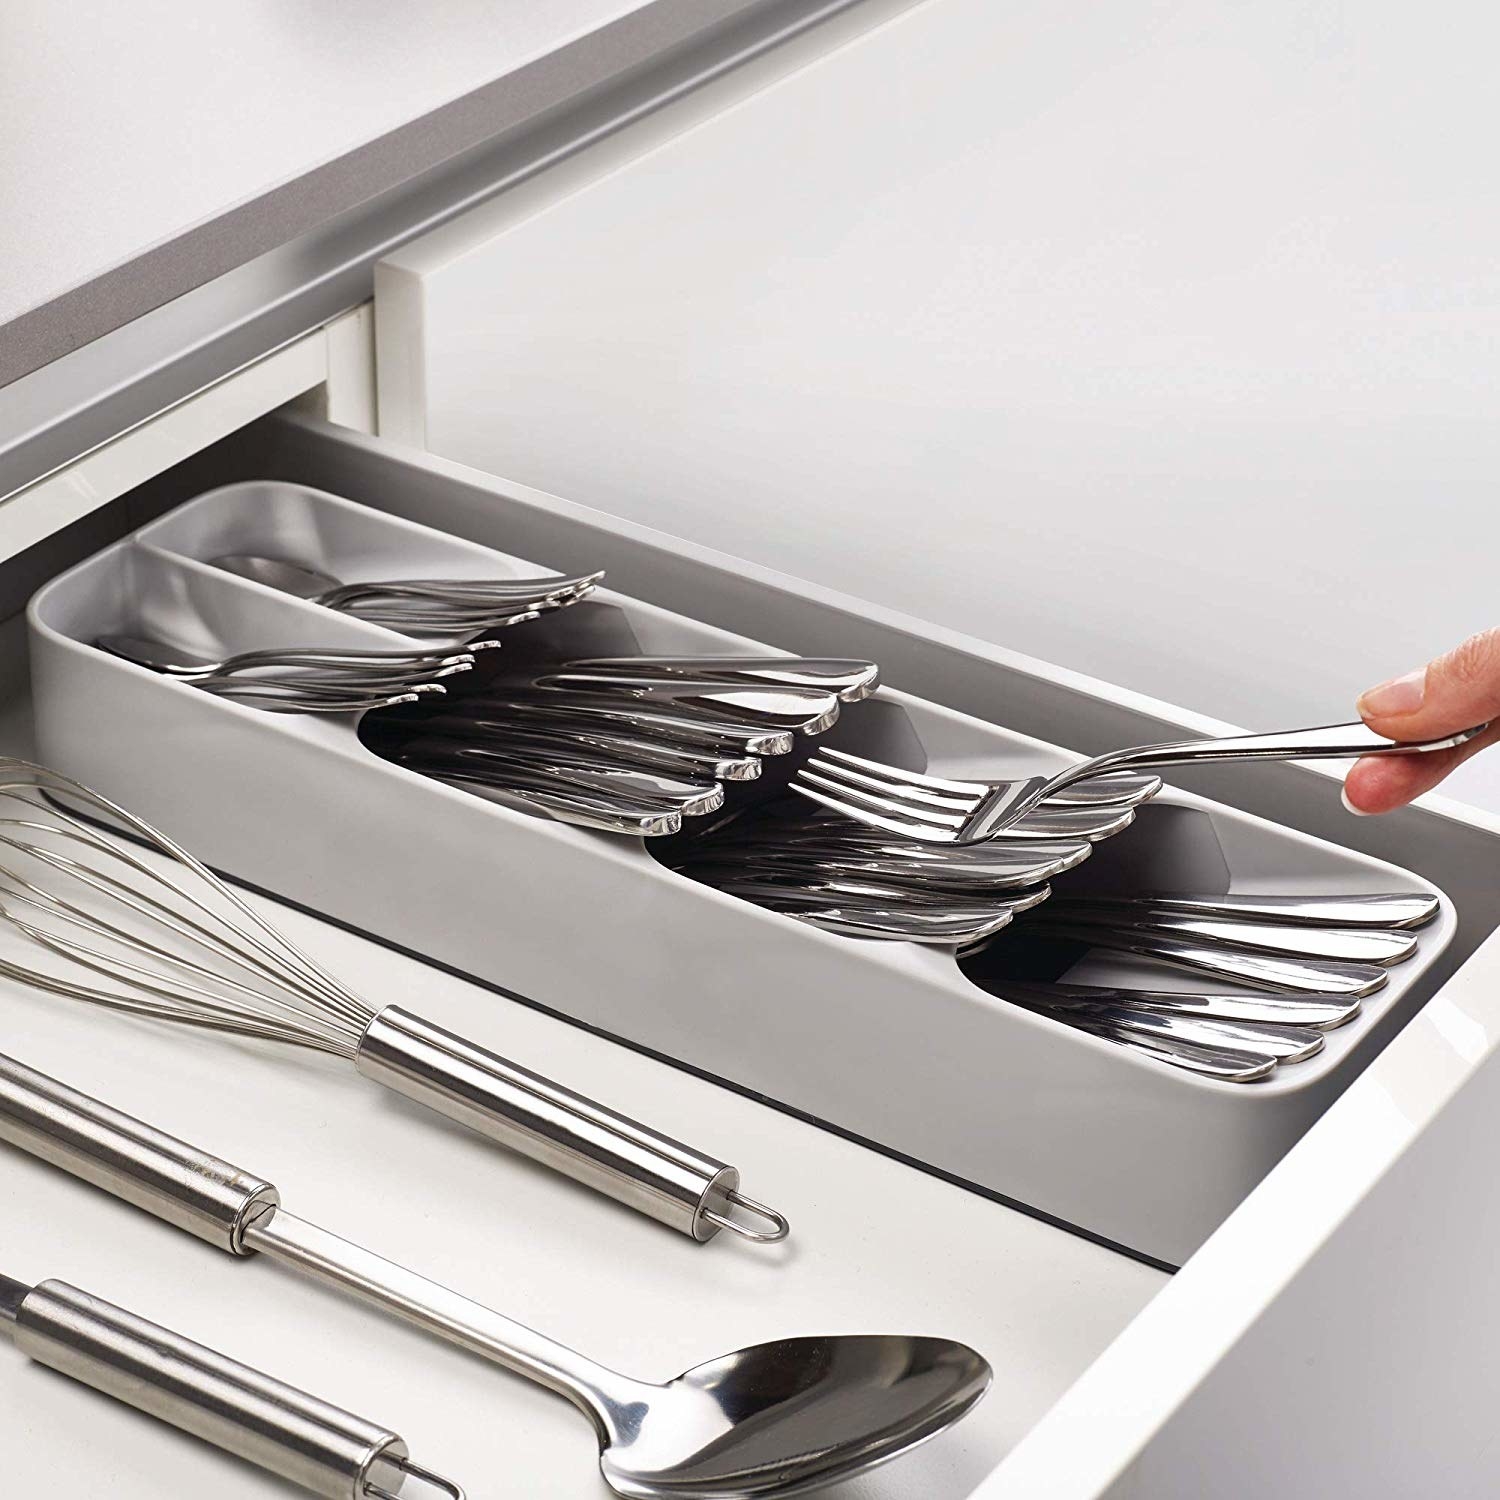 open kitchen drawer with narrow gray silverware organizer that leaves lots of room for other things in a drawer